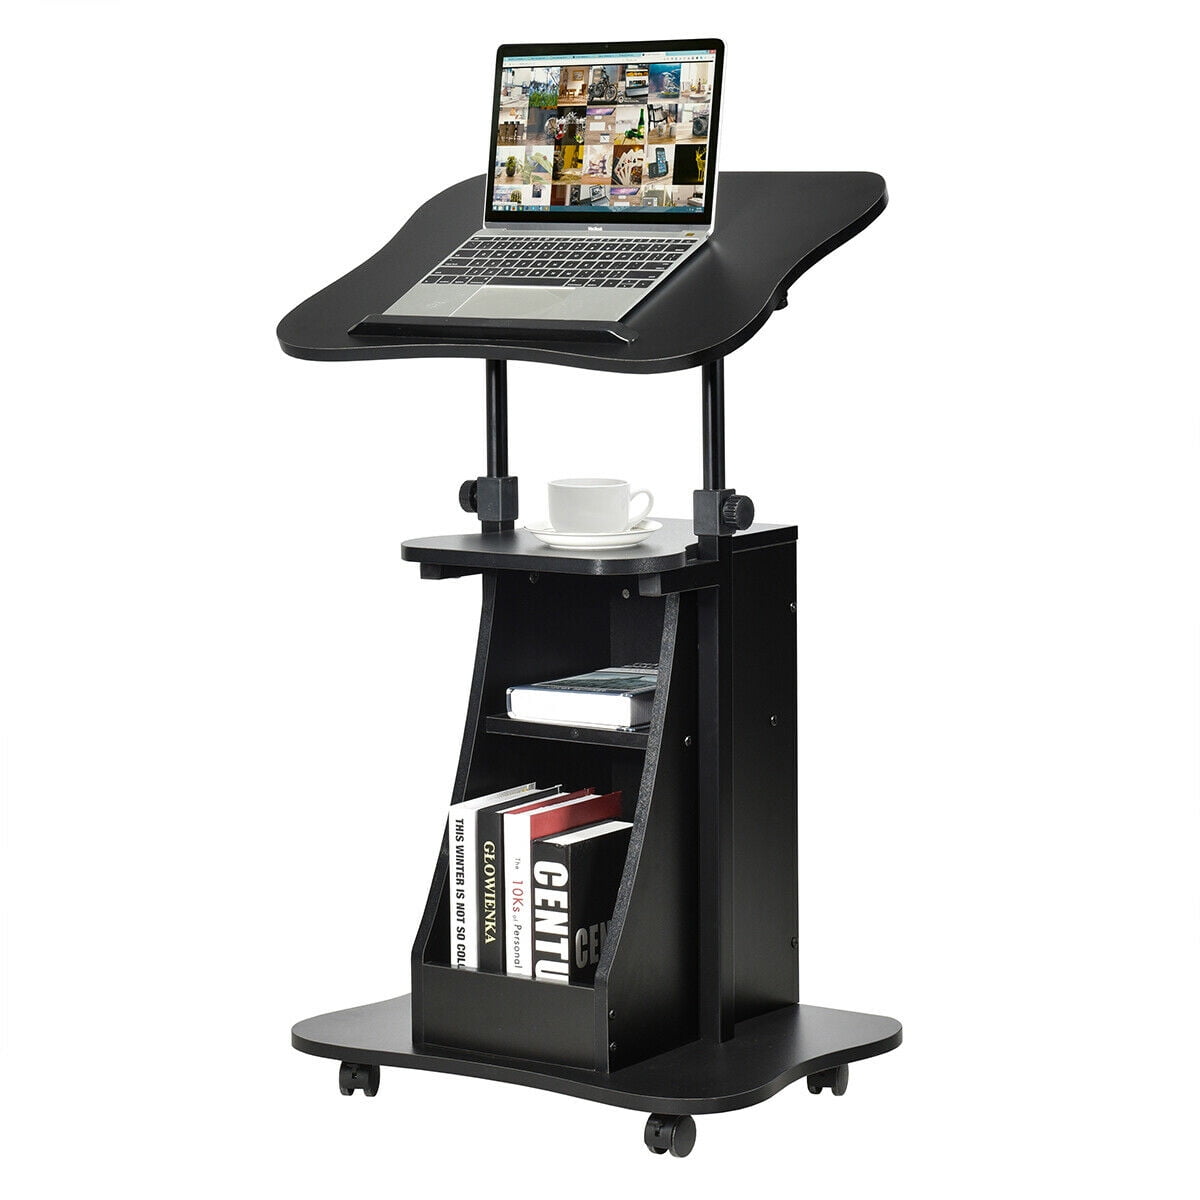 Techni Mobili Sit-to-stand Mobile Medical Laptop Computer Cart Black for sale online 